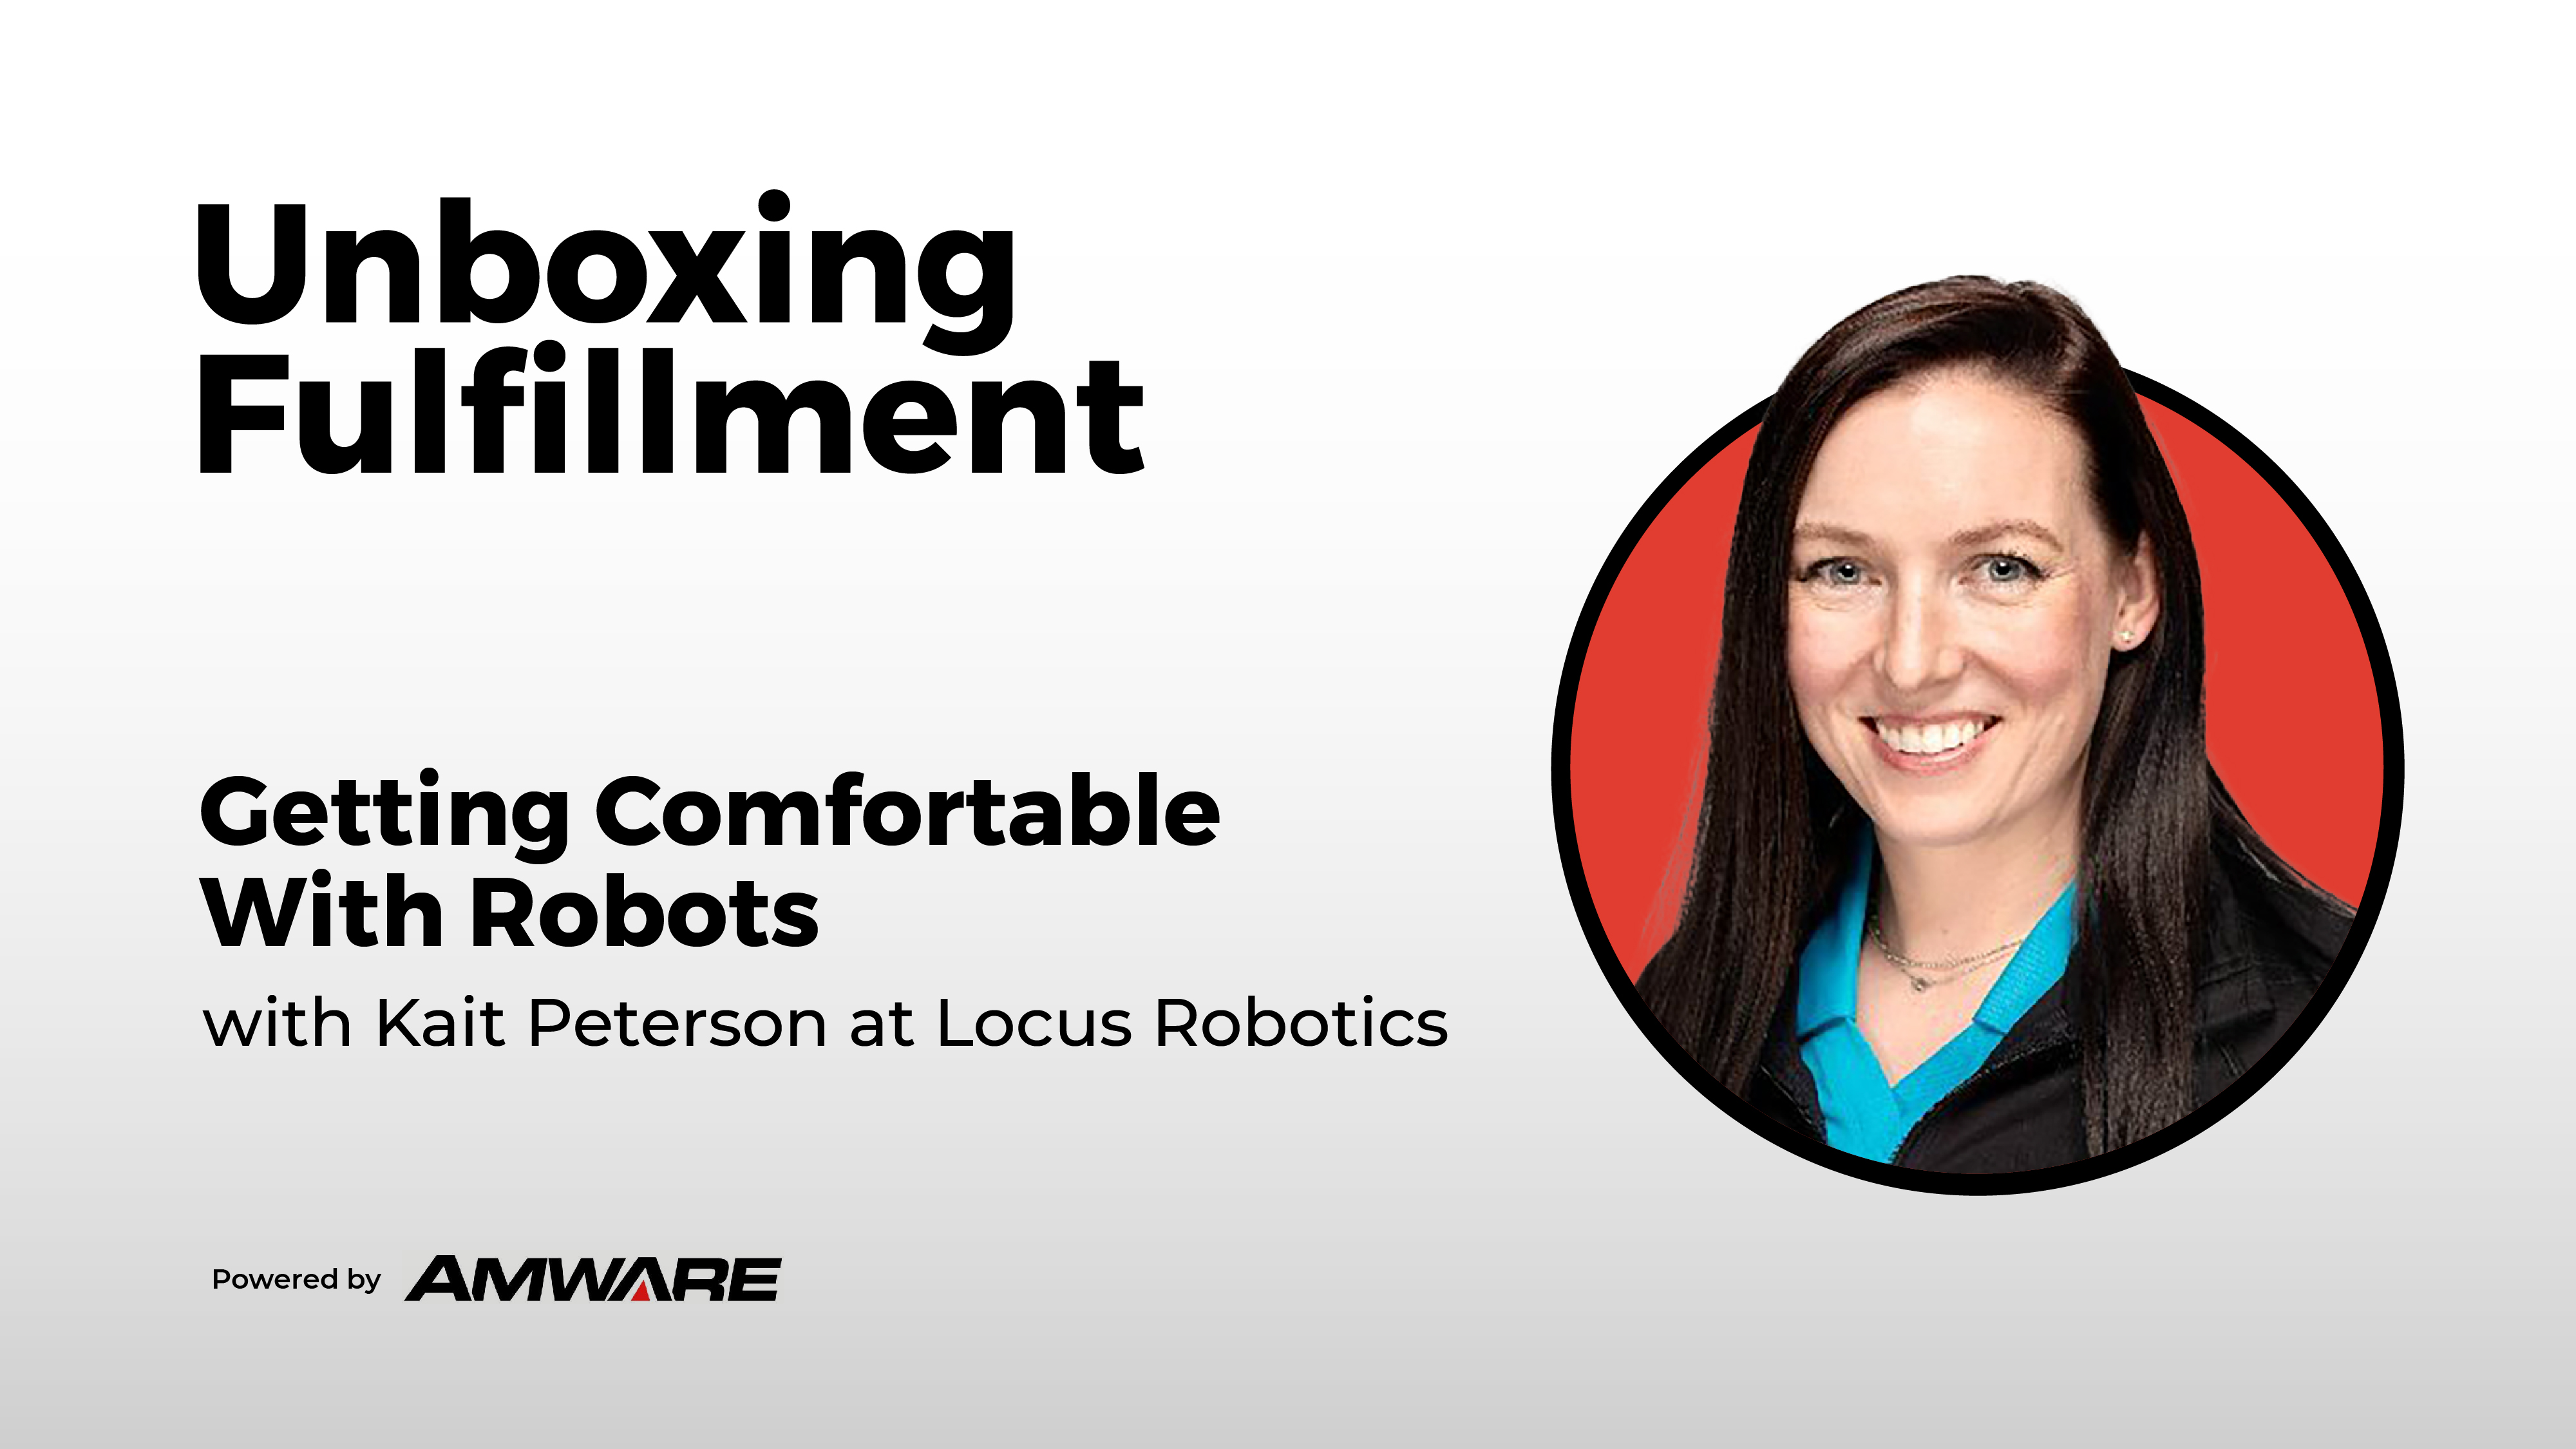 Getting Comfortable With Robots with Kait Peterson at Locus Robotics